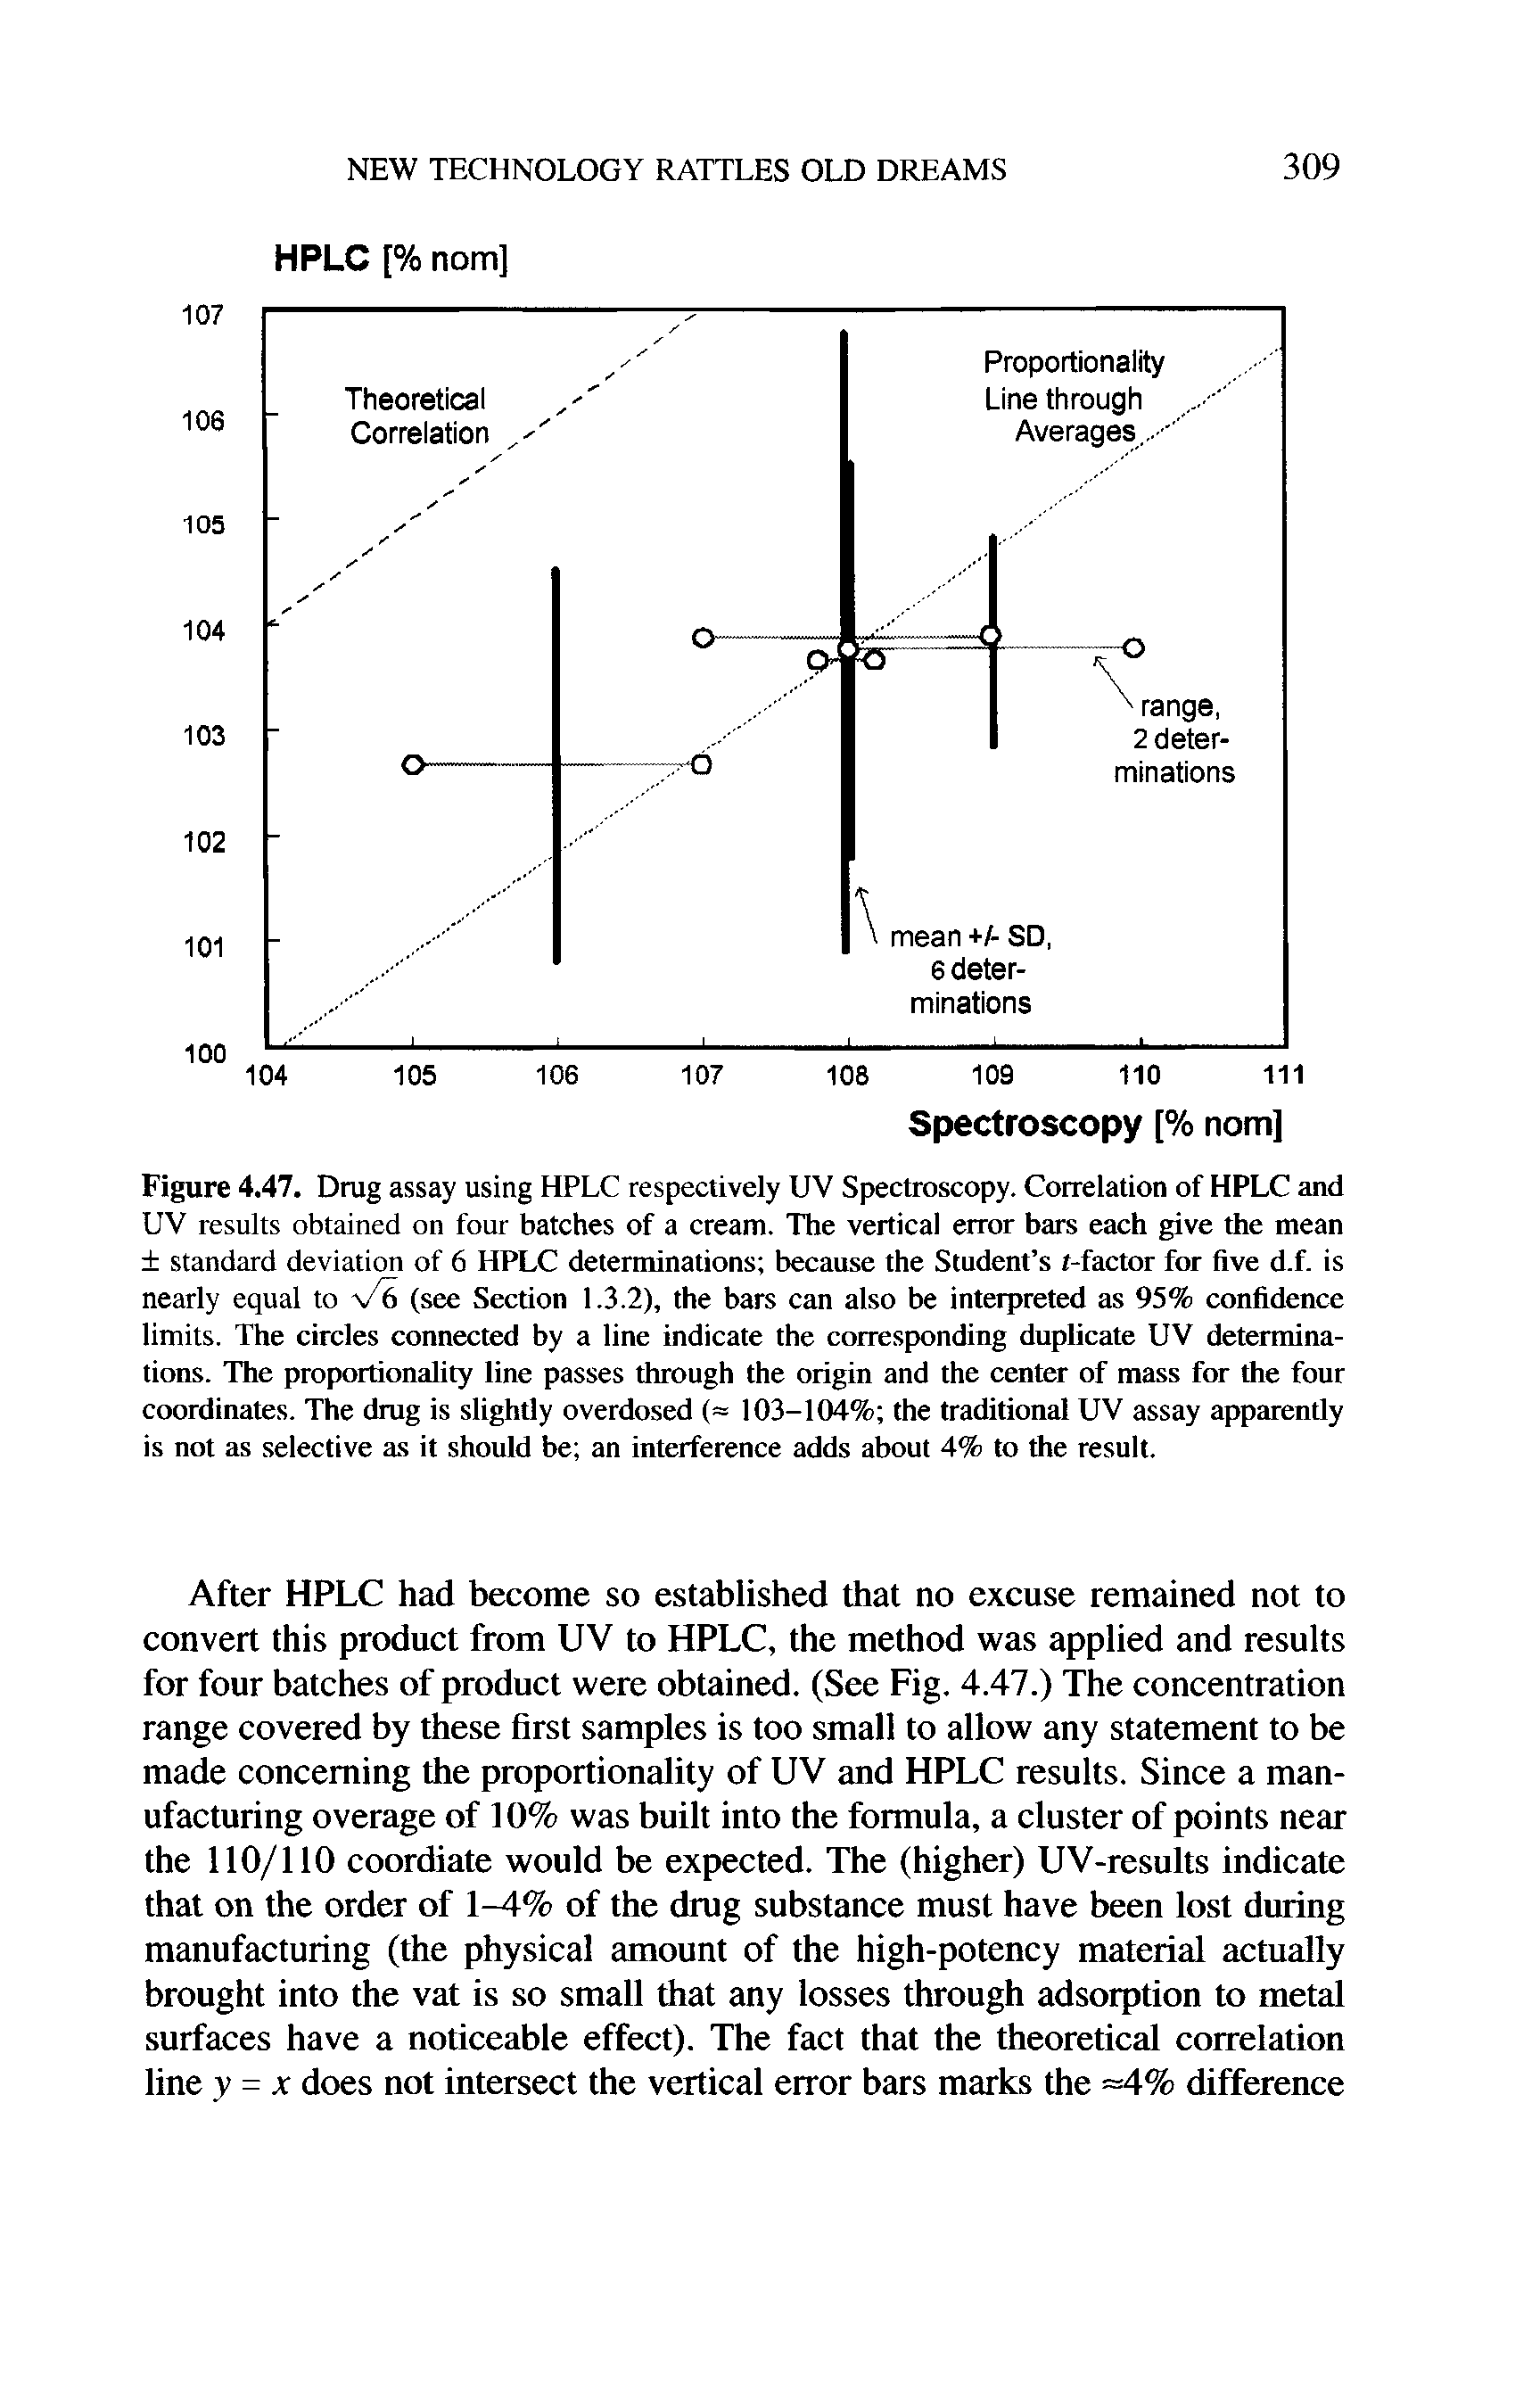 Figure 4.47. Drug assay using HPLC respectively UV Spectroscopy. Correlation of HPLC and UV results obtained on four batches of a cream. The vertical error bars each give the mean + standard deviation of 6 HPLC determinations because the Student s t-factor for five d.f. is nearly equal to /6 (see Section 1.3.2), the bars can also be interpreted as 95% confidence limits. The circles connected by a line indicate the corresponding duplicate UV determinations. The proportionality line passes through the origin and the center of mass for the four coordinates. The drug is slightly overdosed (= 103-104% the traditional UV assay apparently is not as selective as it should be an interference adds about 4% to the result.